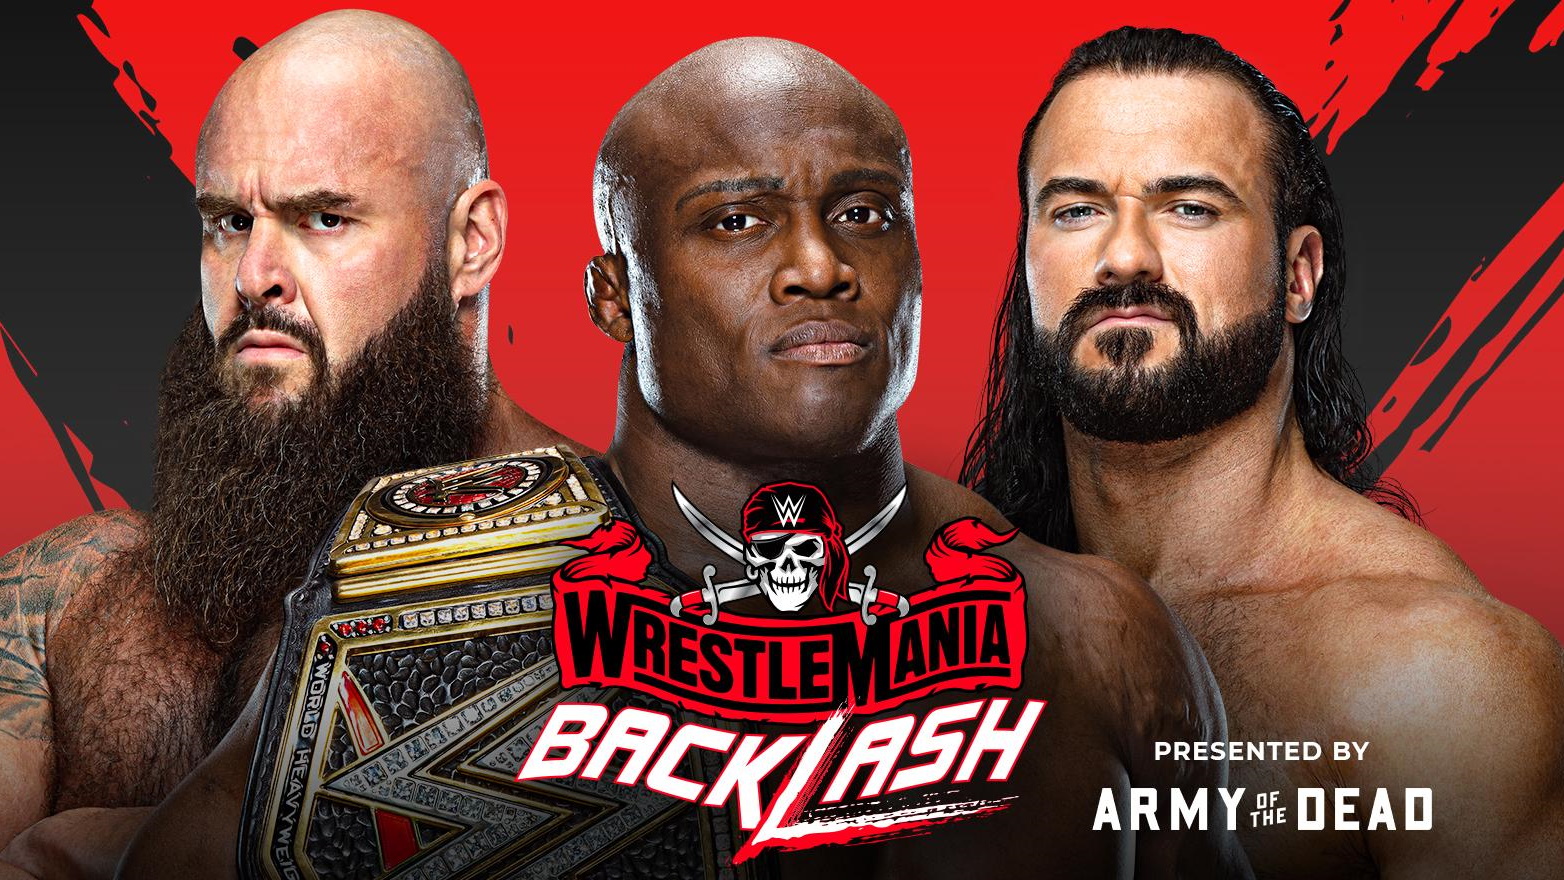 WrestleMania Backlash 2021 live stream how to watch WWE online from